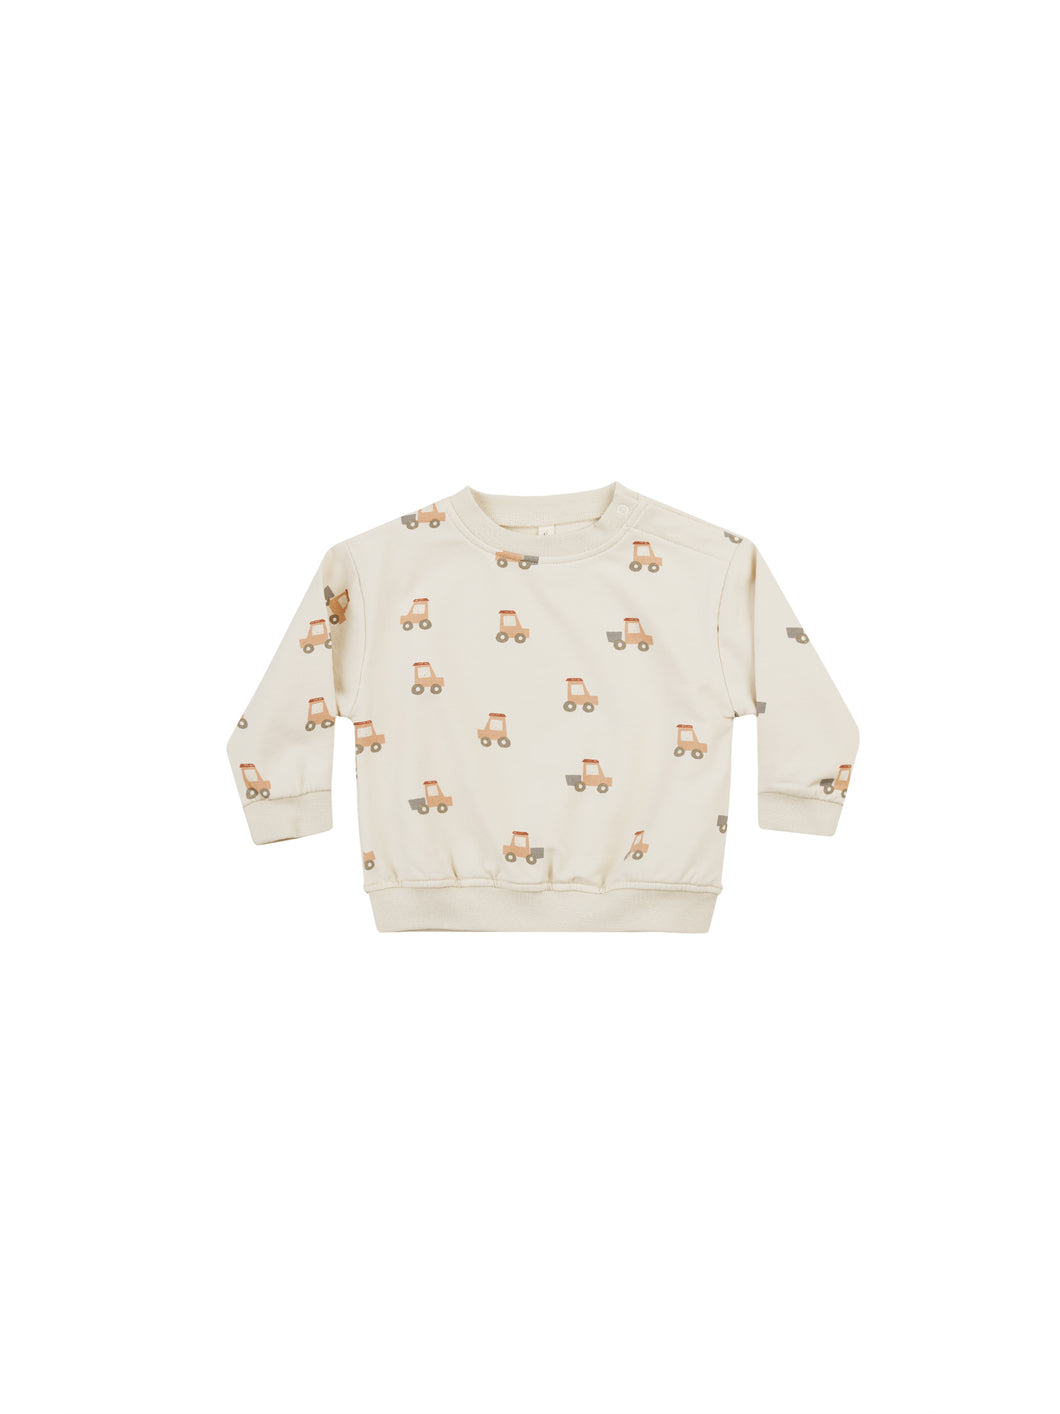 beige baby crewneck sweatshirt with a tractor all over print. 